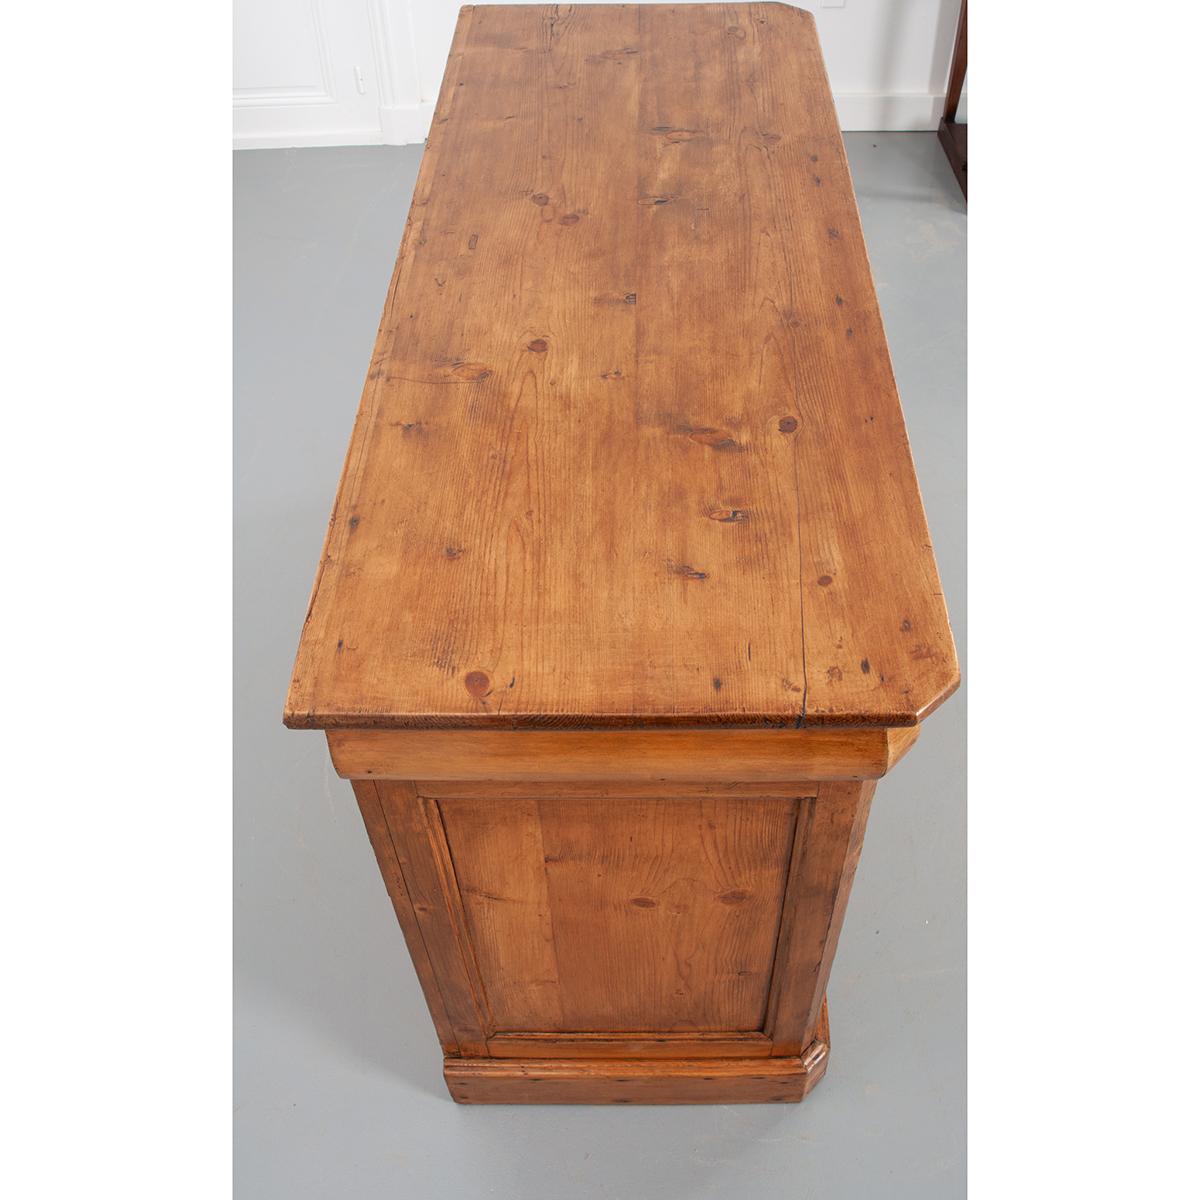 This nice Louis Philippe-style pine enfilade with canted corners, circa 1870, features a beautiful patinated finish highlighting the rustic charm of this piece. The wood top sits above an apron with three drawers, each with a turned wood knob. The